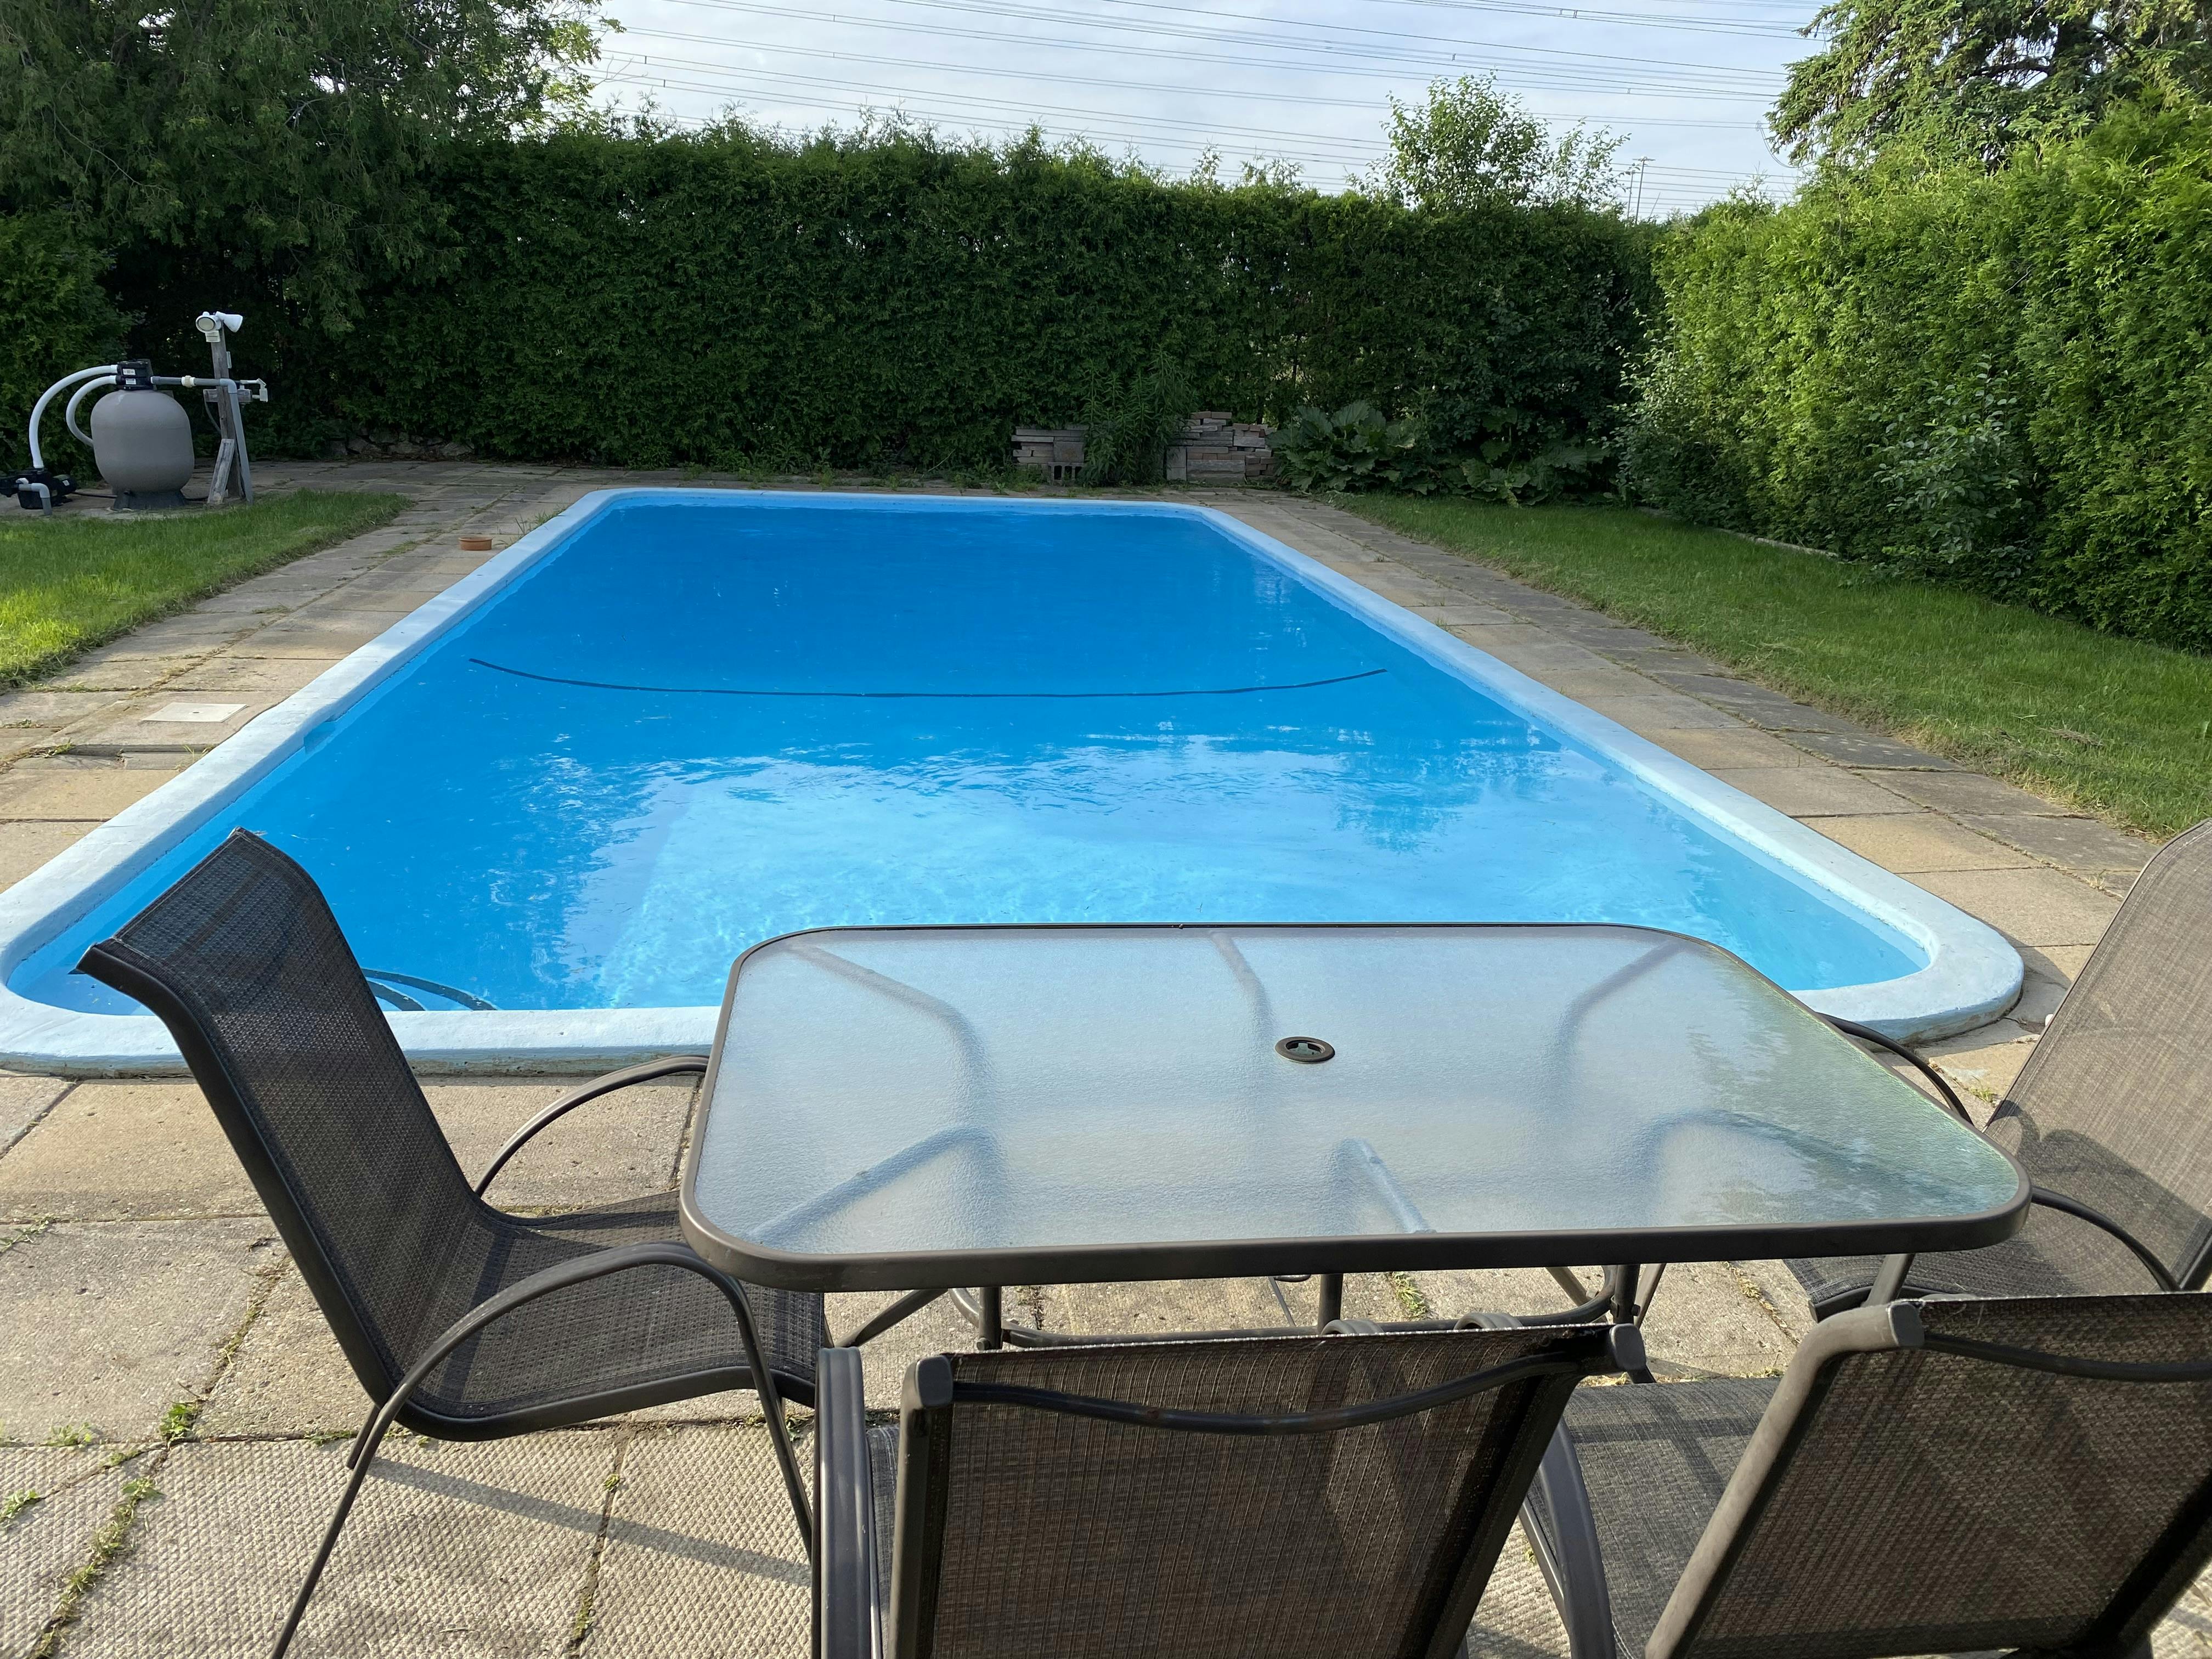 Spacious 16 X 36 Pool In A Secluded Yard - Rent a private pool in Vaughan, Ontario